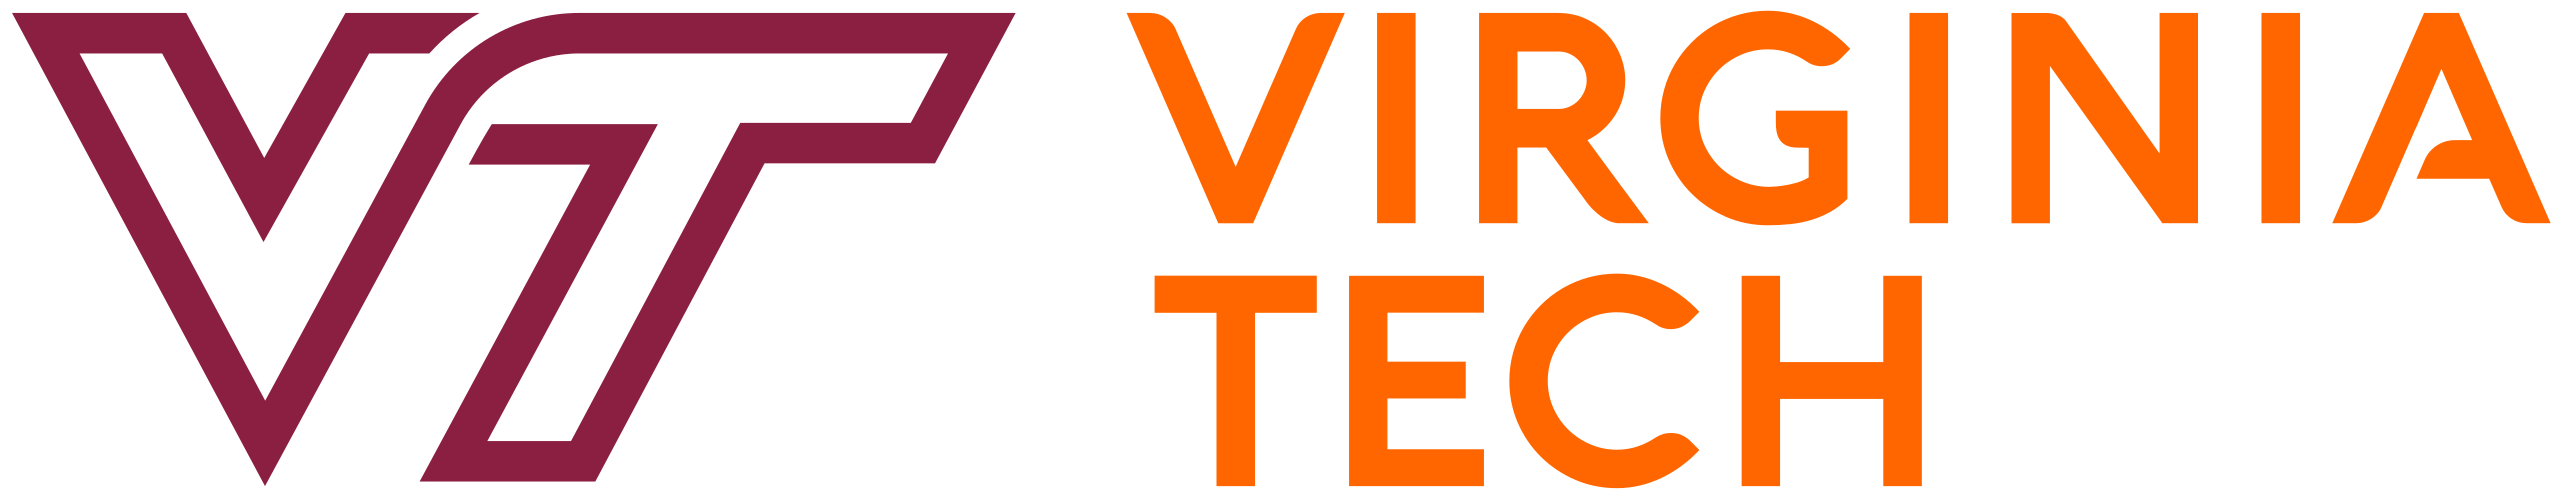 Virginia Tech logo.svg Instantly Interpret Free: Legalese Decoder - AI Lawyer Translate Legal docs to plain English